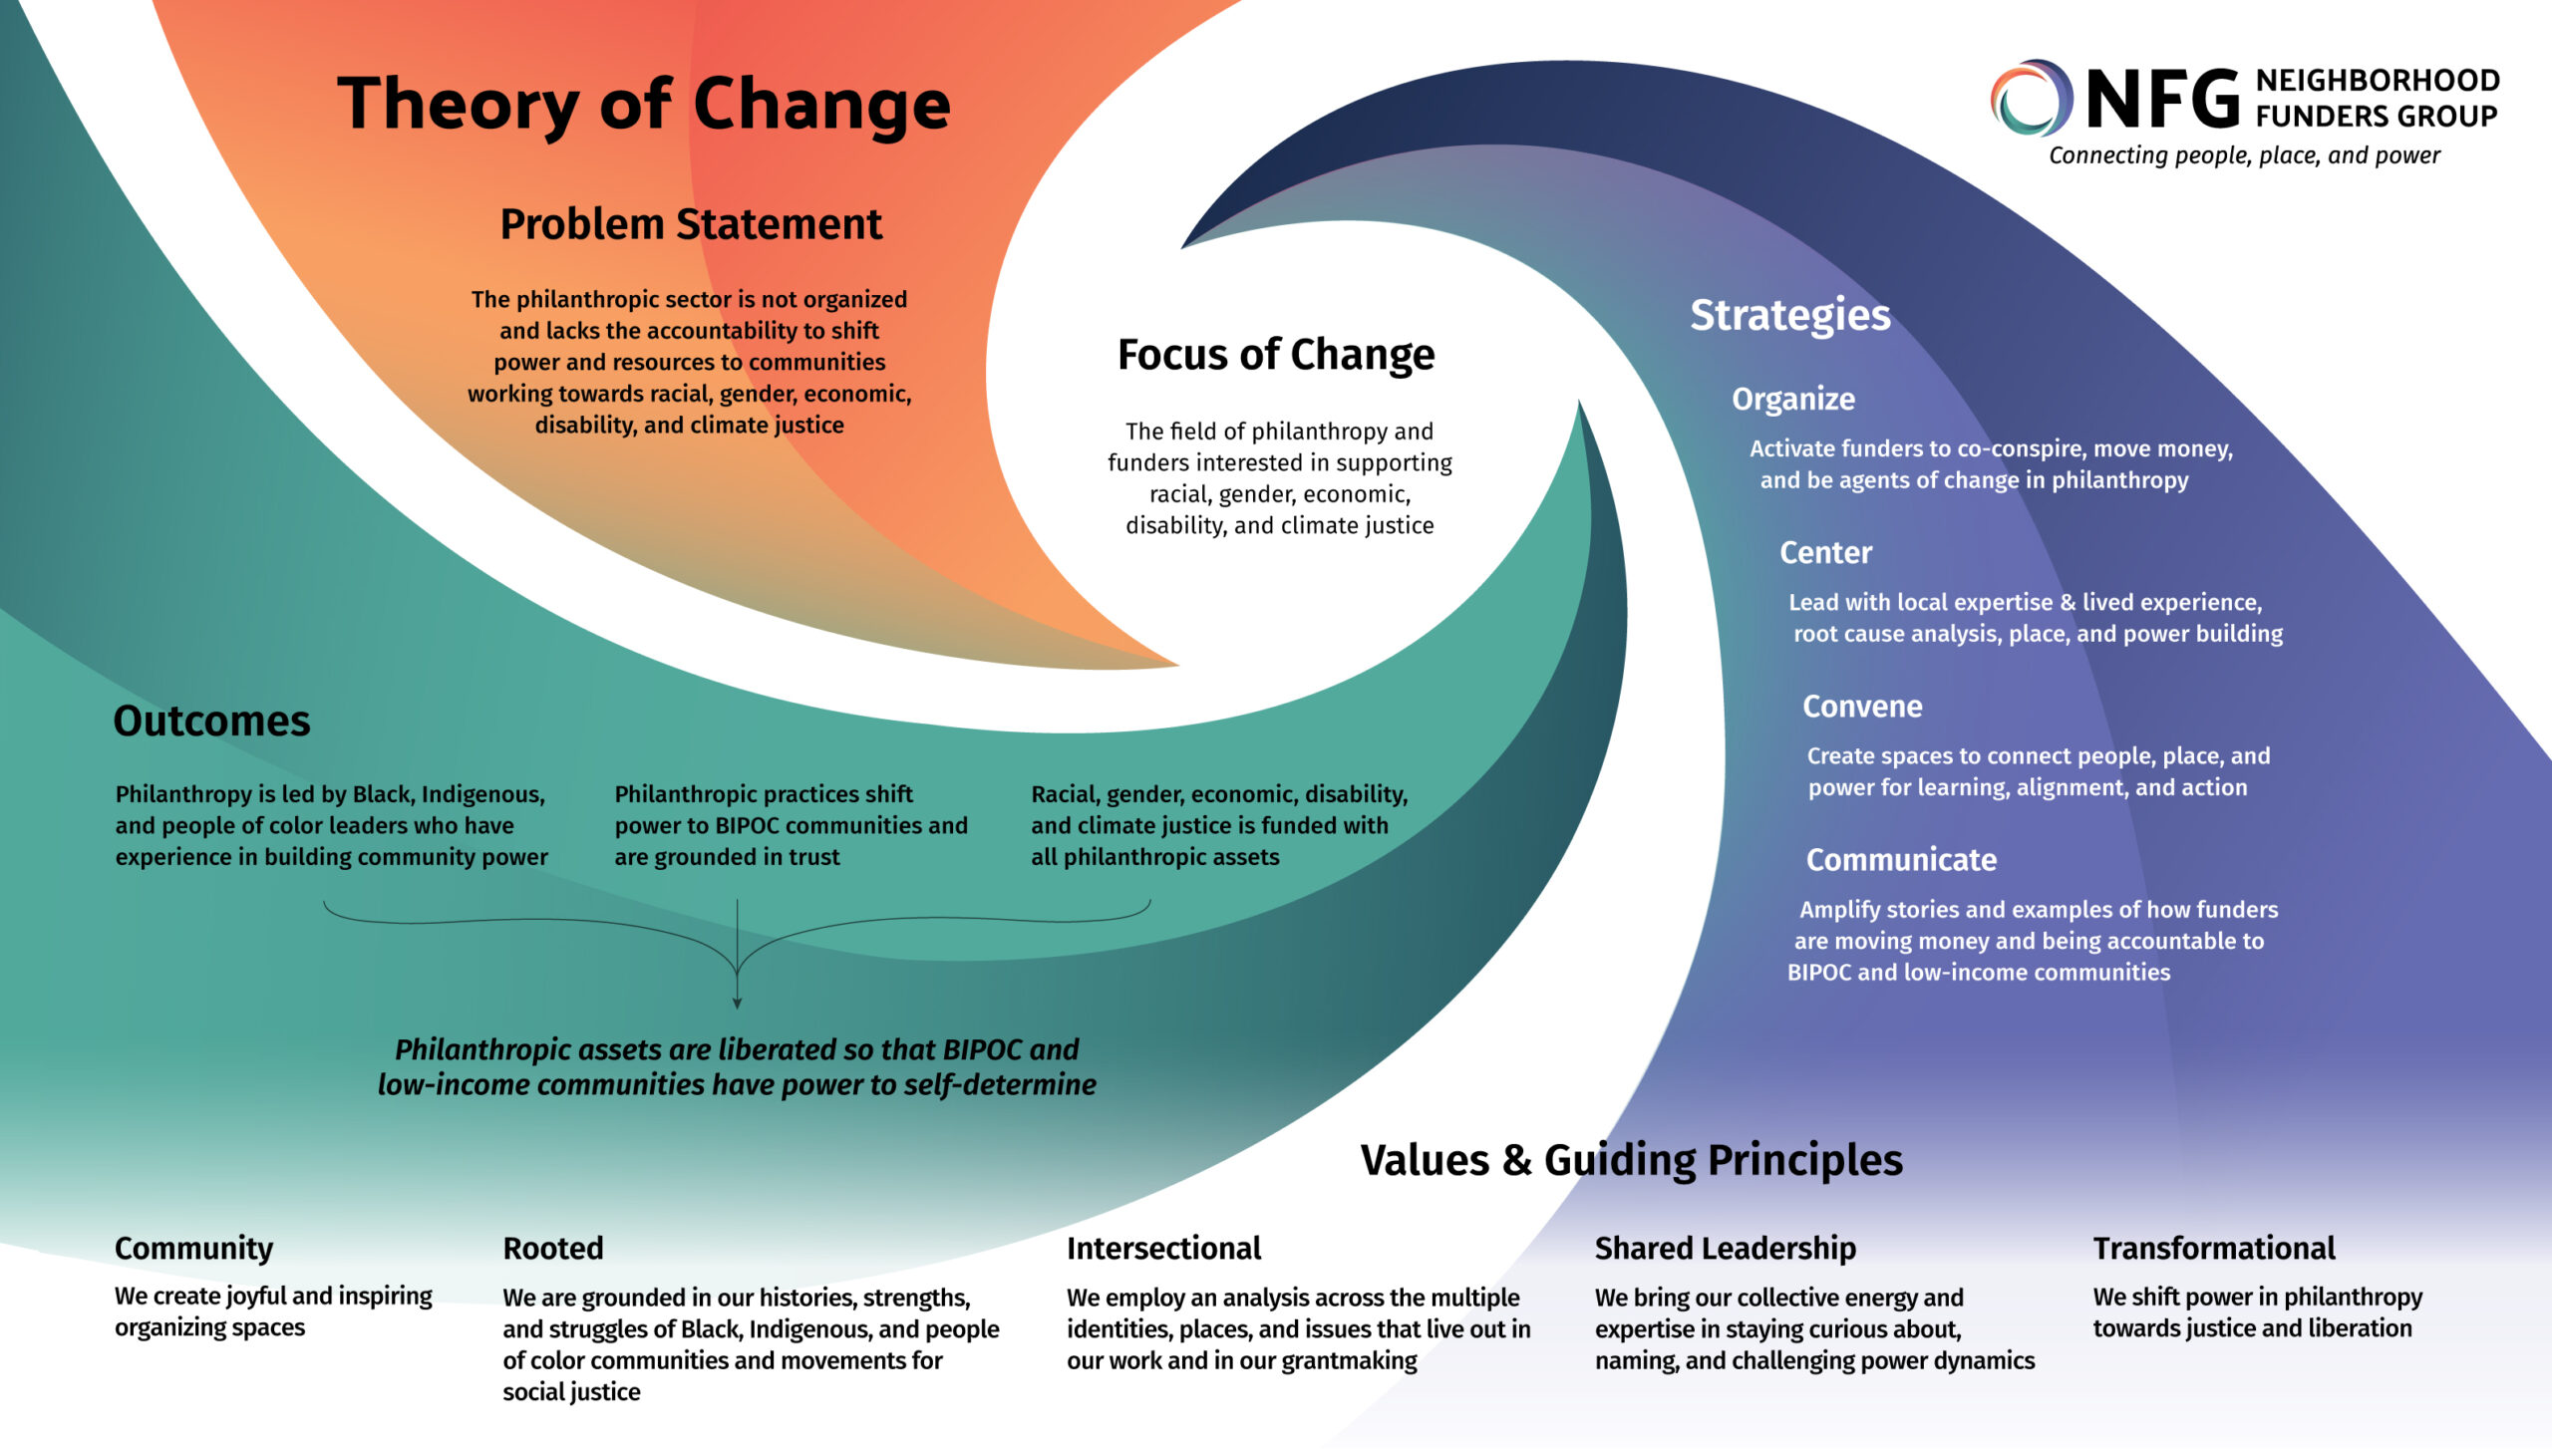 Summary of theory of change graphic. Problem statement: "The philanthropic sector is not organized to shift power and resources to communities working towards racial, gender, economic, disability, and climate justice." Outcomes: "Philanthropic assets are liberated so that BIPOC and low-income communities have power to self-determine."